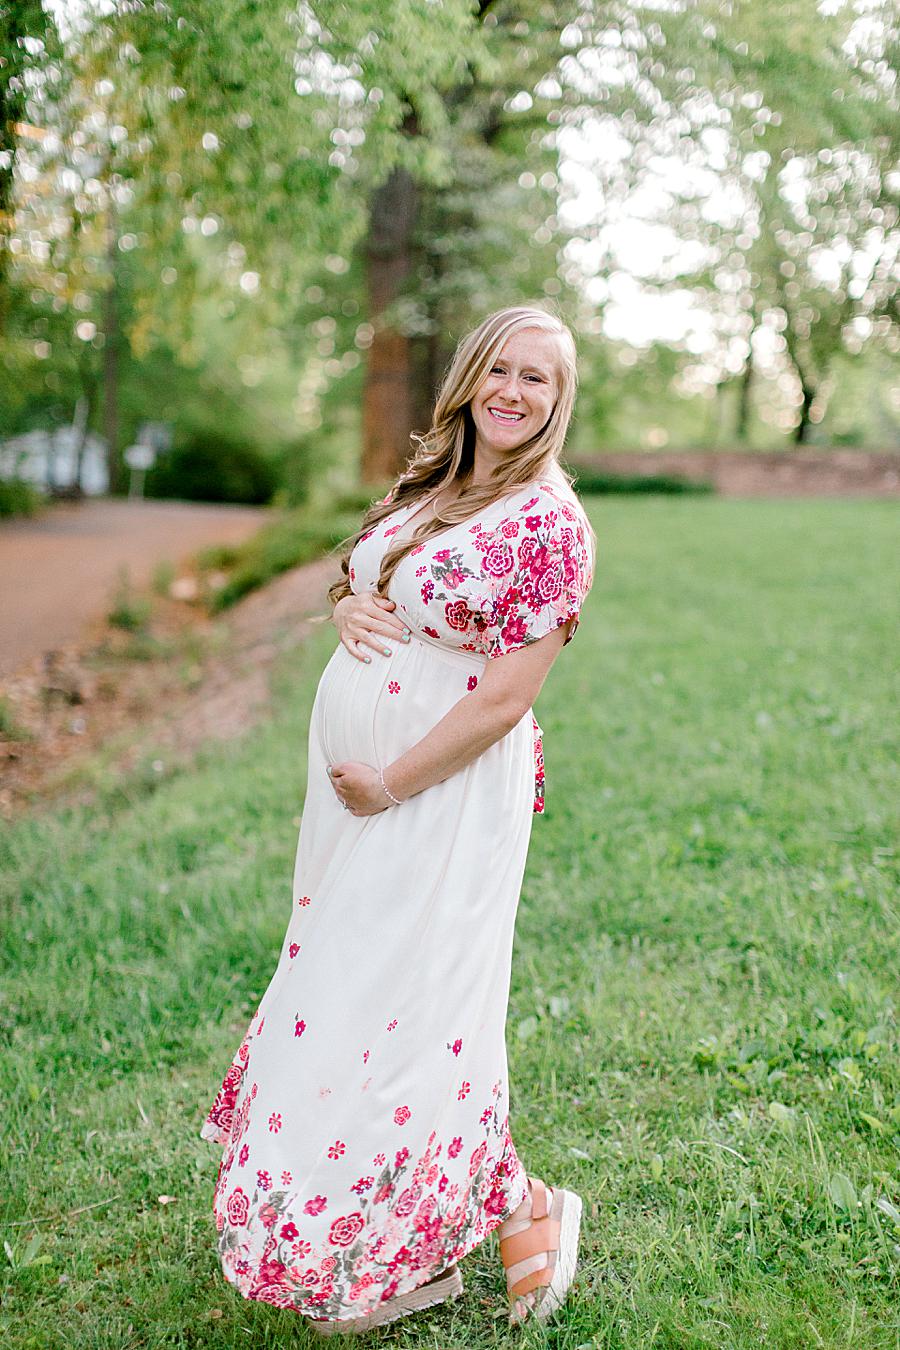 Floral maternity dress at this Maternity Pictures by Knoxville Wedding Photographer, Amanda May Photos.